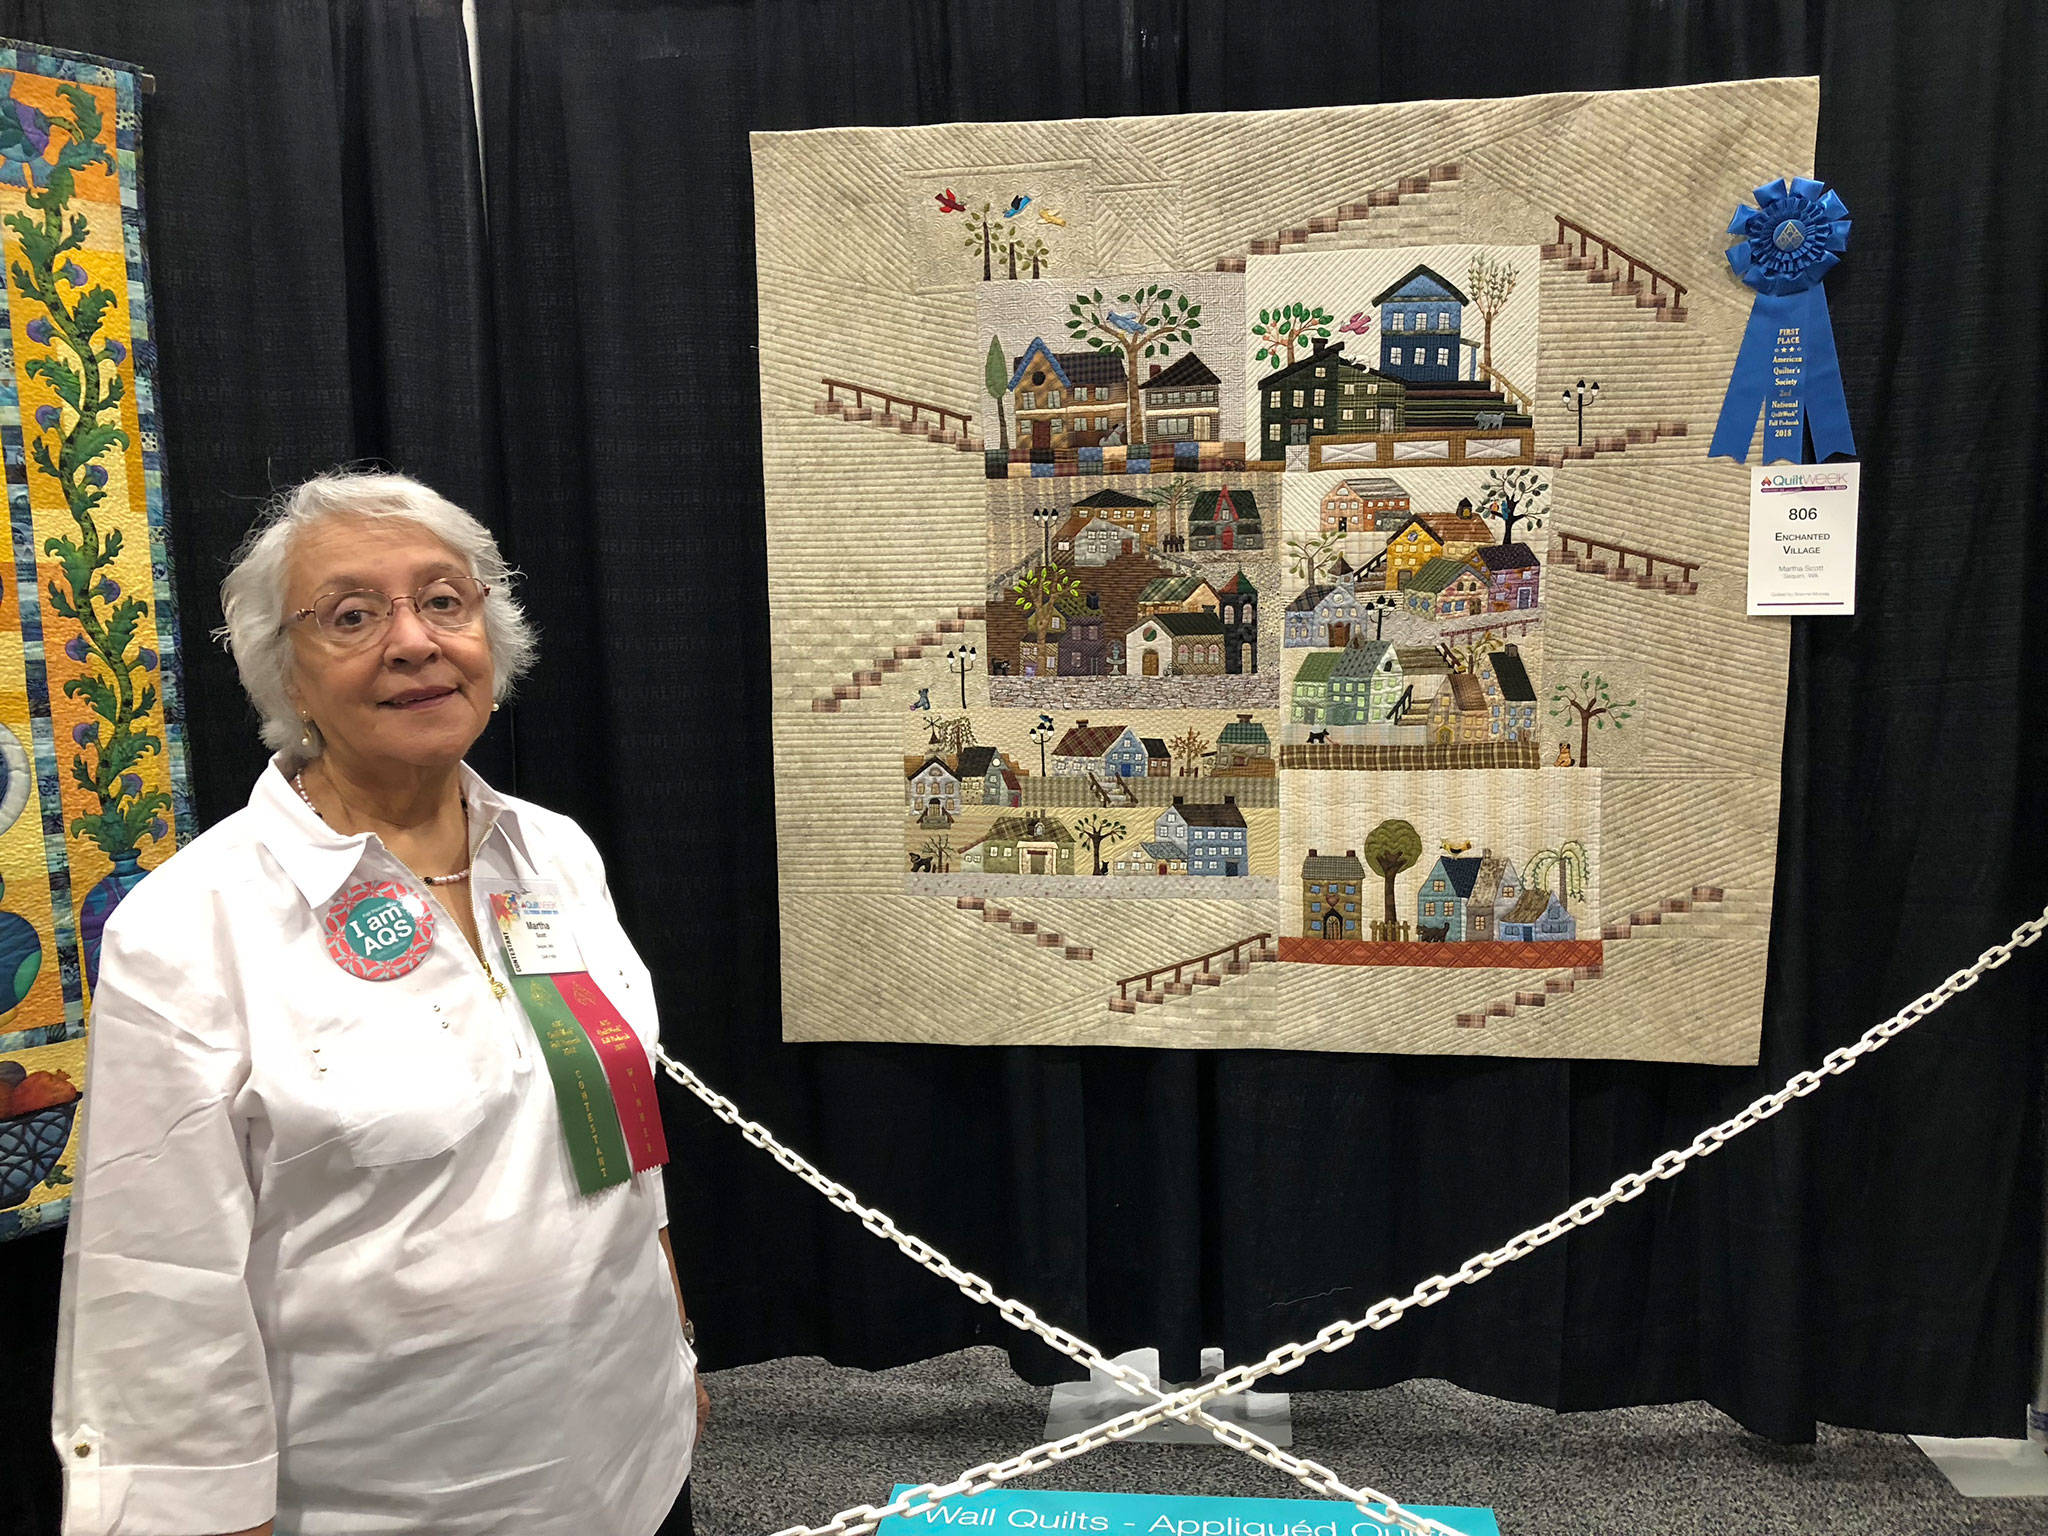 In Paducah, Kentucky, Martha Scott won first place for her “Enchanted Village” in the “Wall Hanging Hand Appliqué” category. Submitted photo